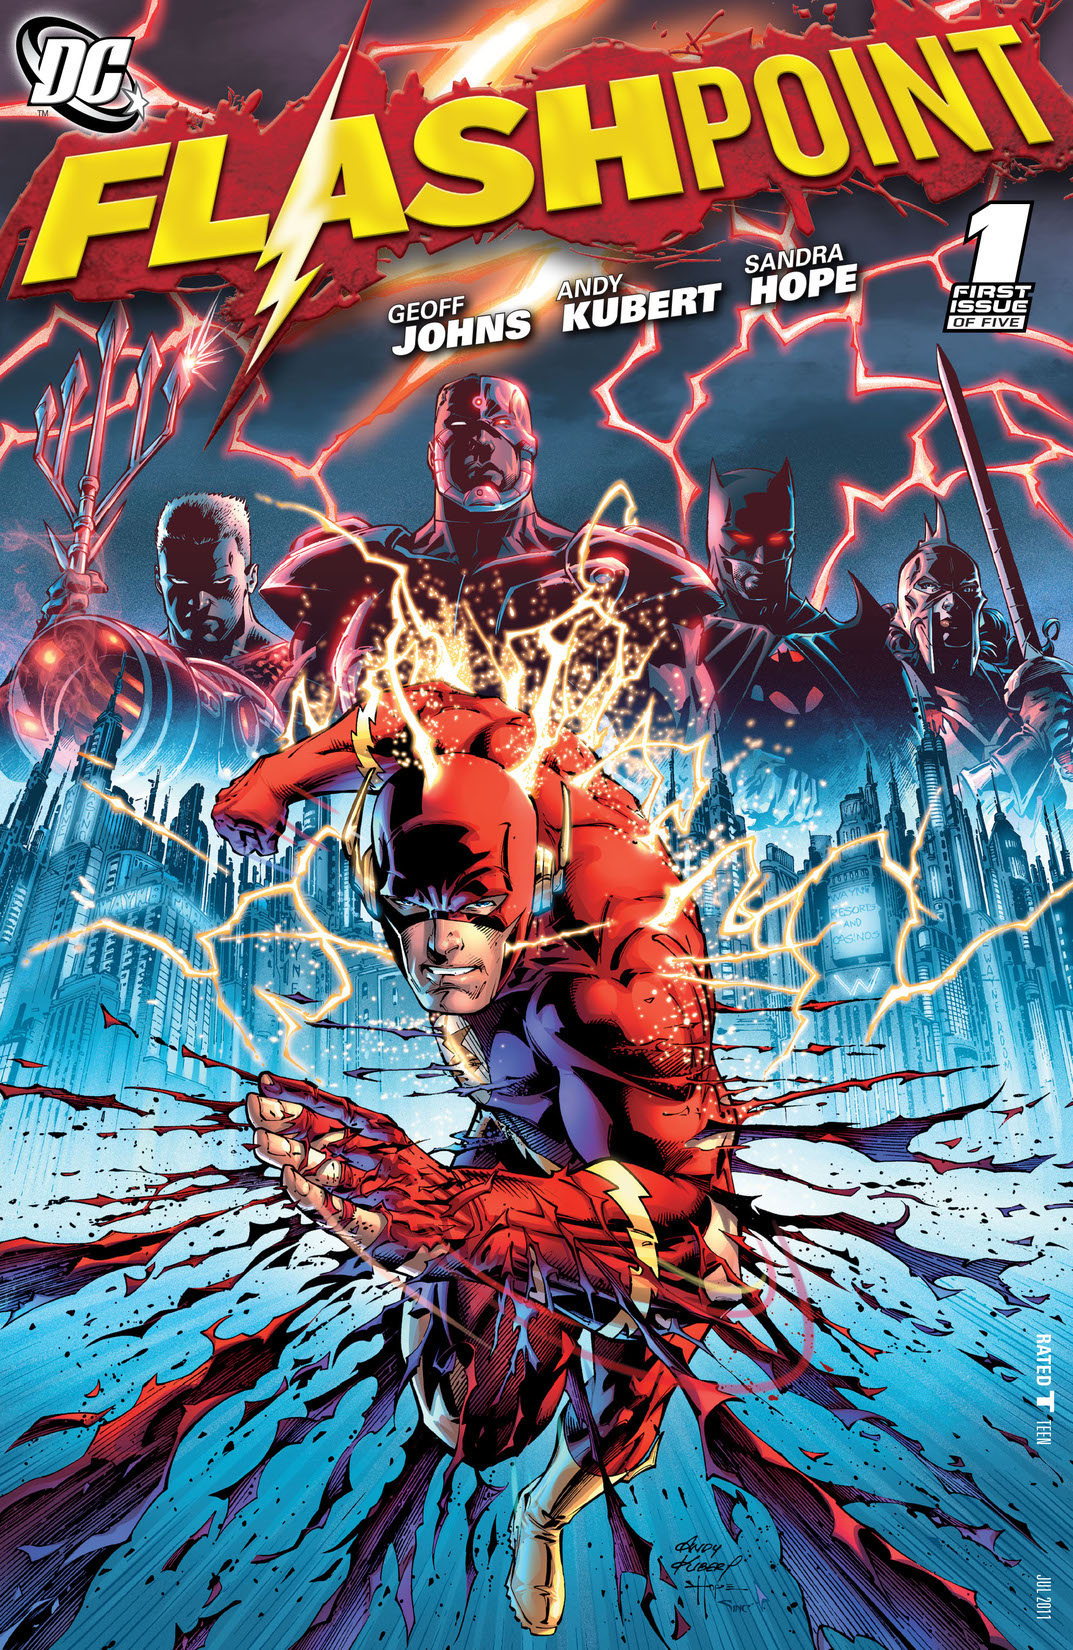 Flashpoint #1 preview images